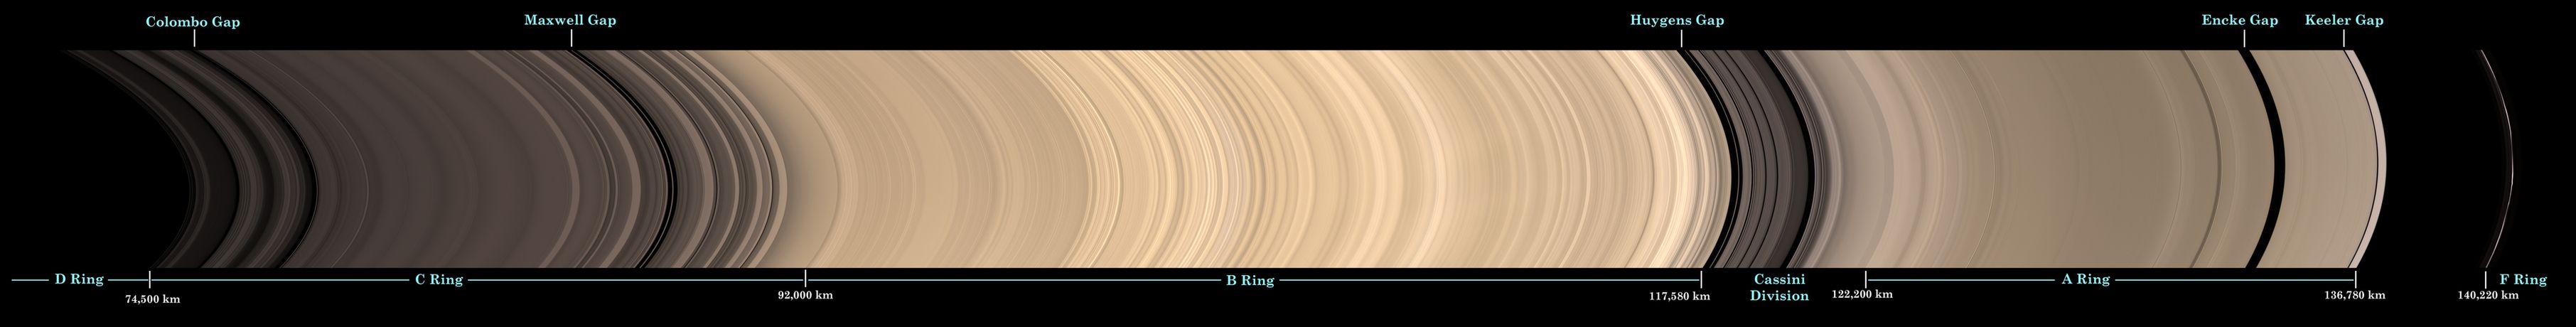 A Full Sweep of Saturn's Rings